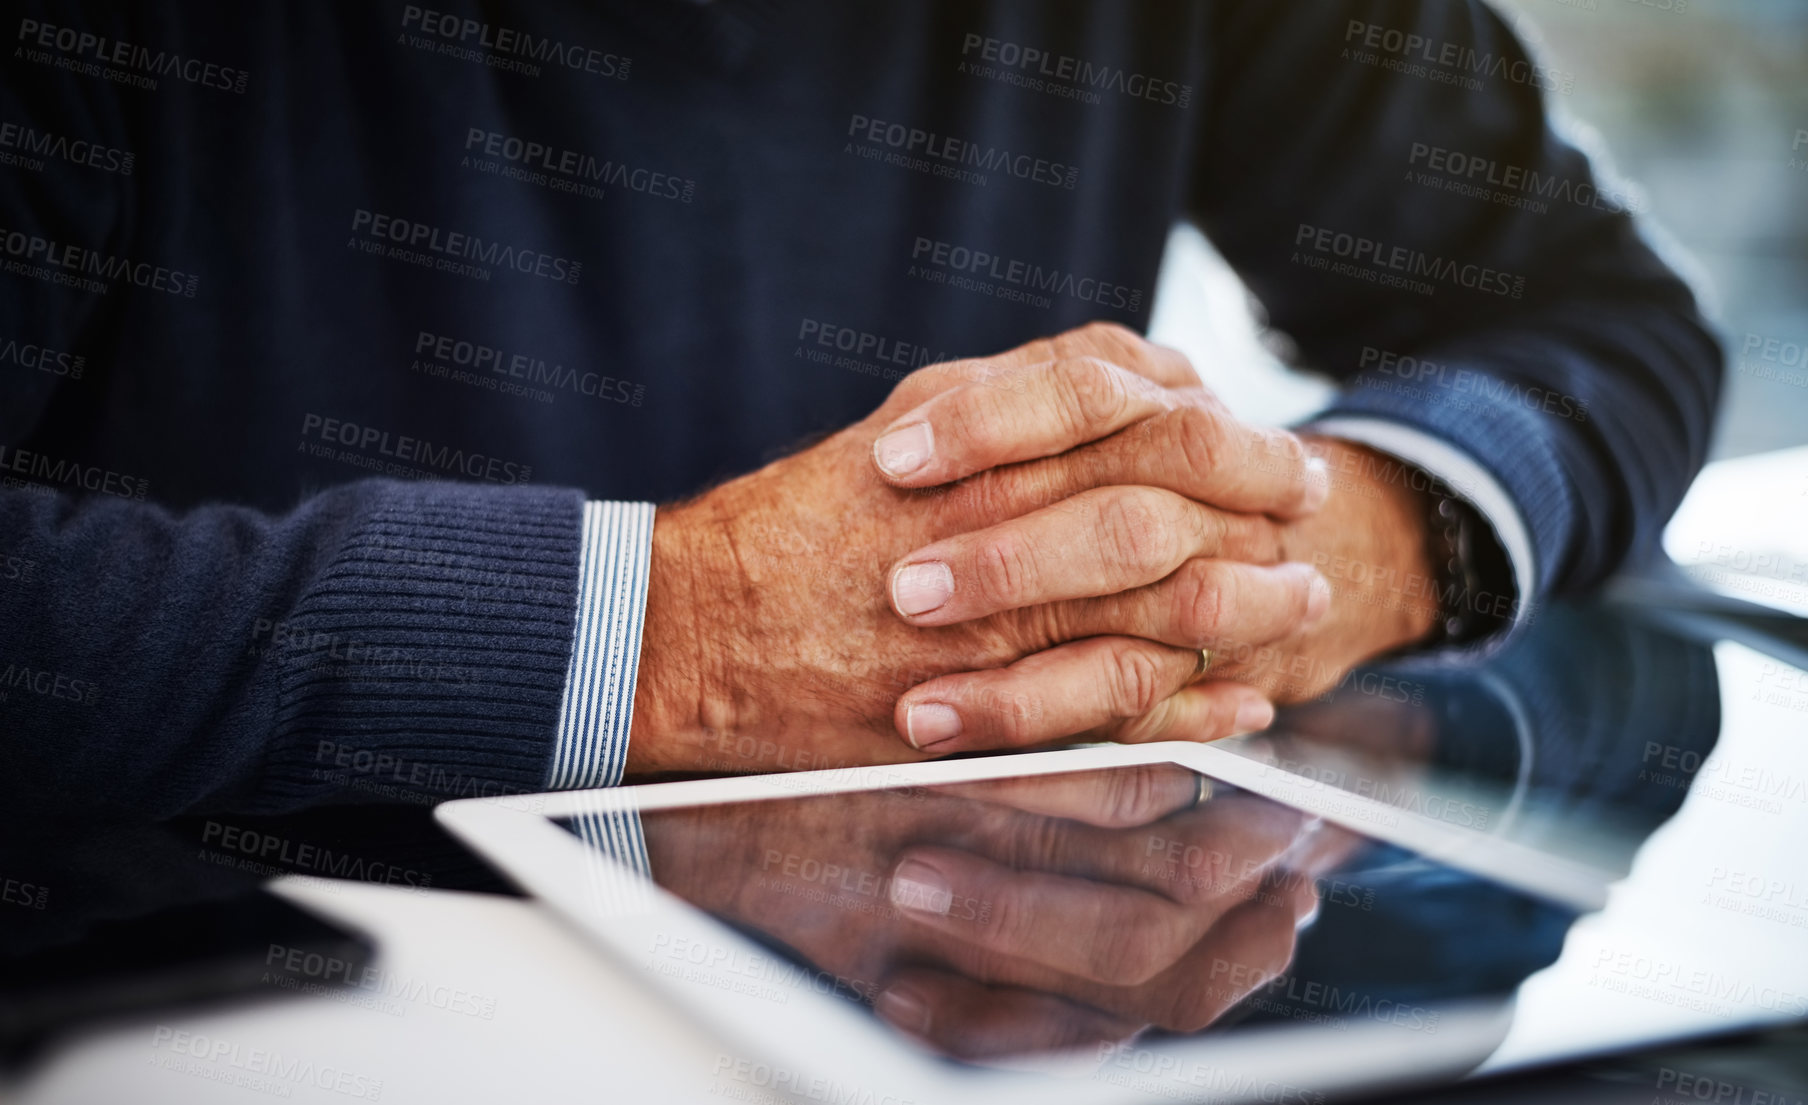 Buy stock photo Cropped shot of a businessman sitting at his work desk with his hands clasped